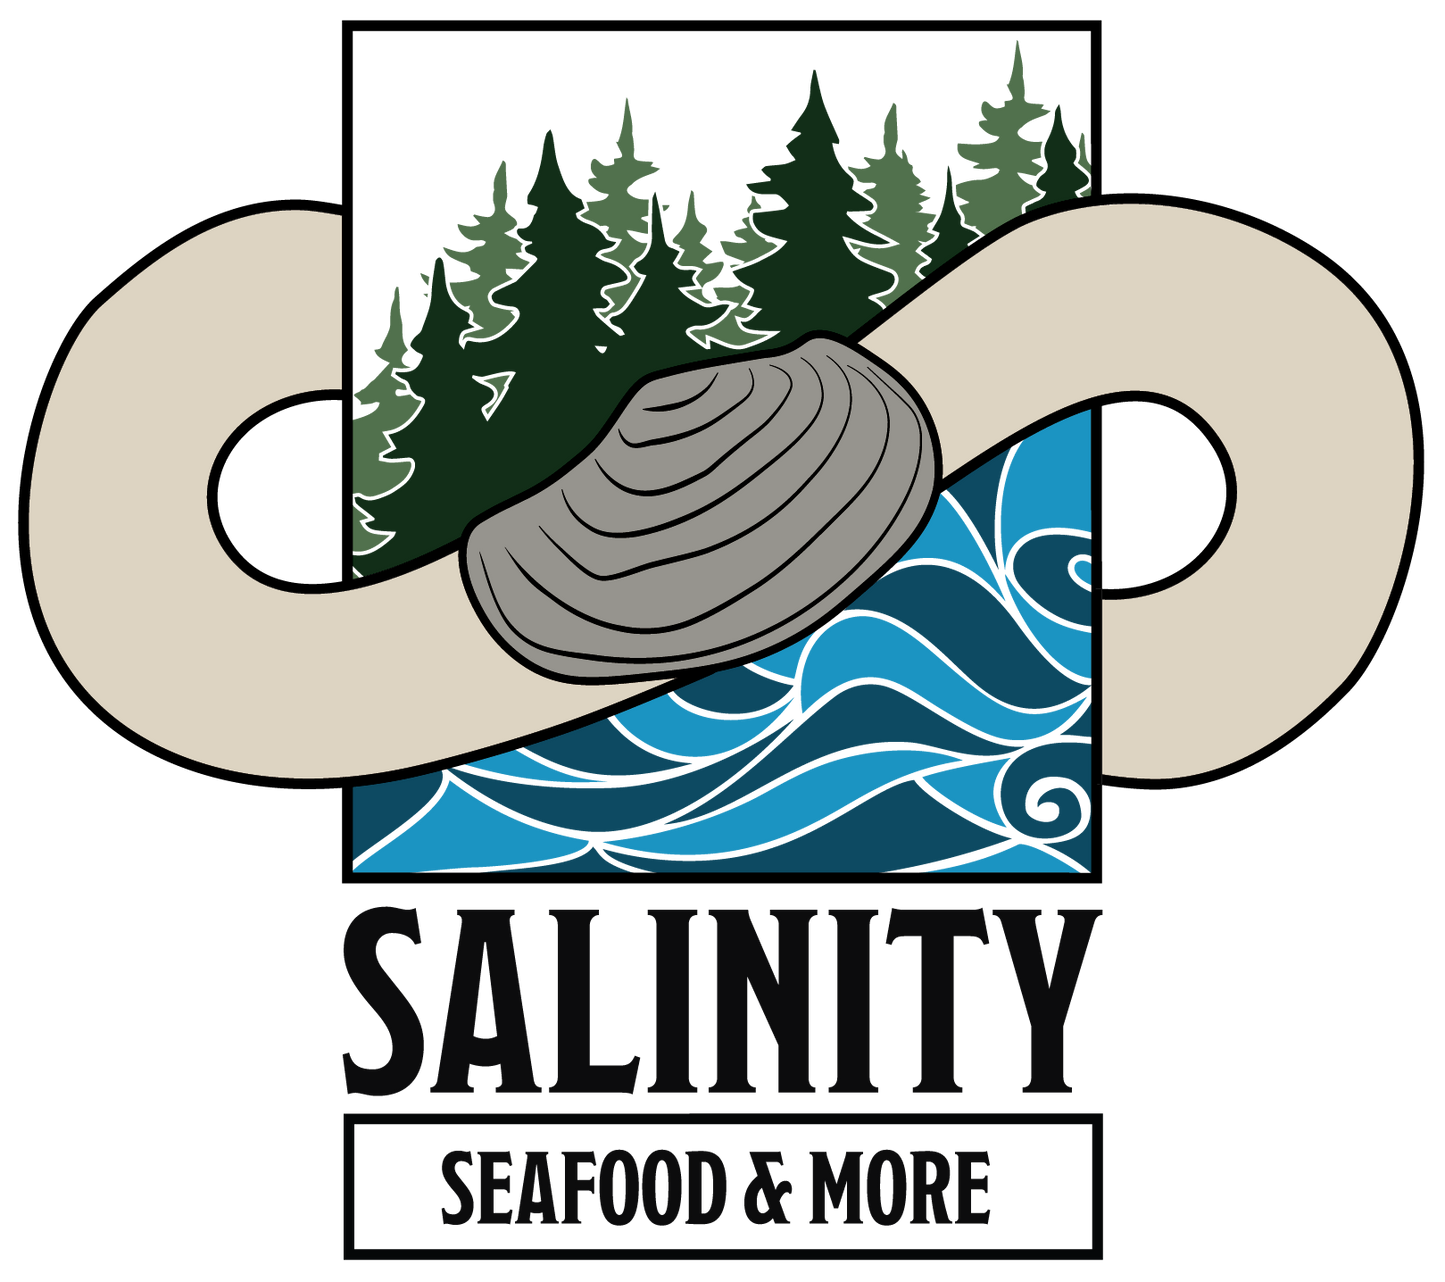 Salinity Seafood & More logo, a geoduck clam in the shape of an infinity sign, wrapped around trees and waves